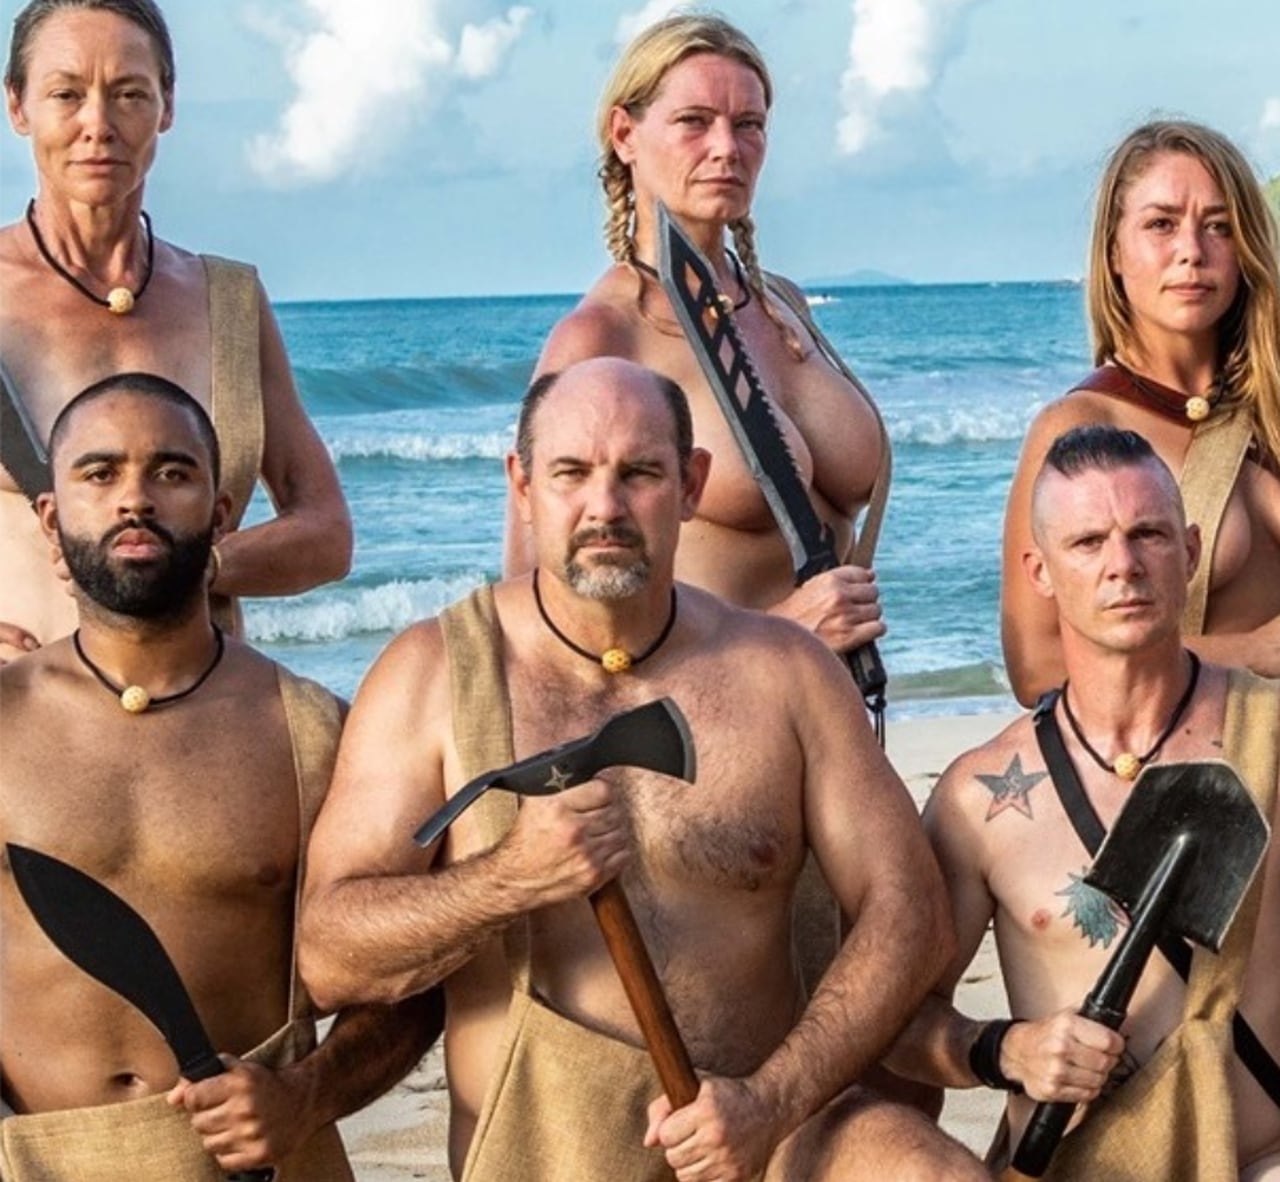 dimitri morgan recommends naked and afraid unconcerned pic